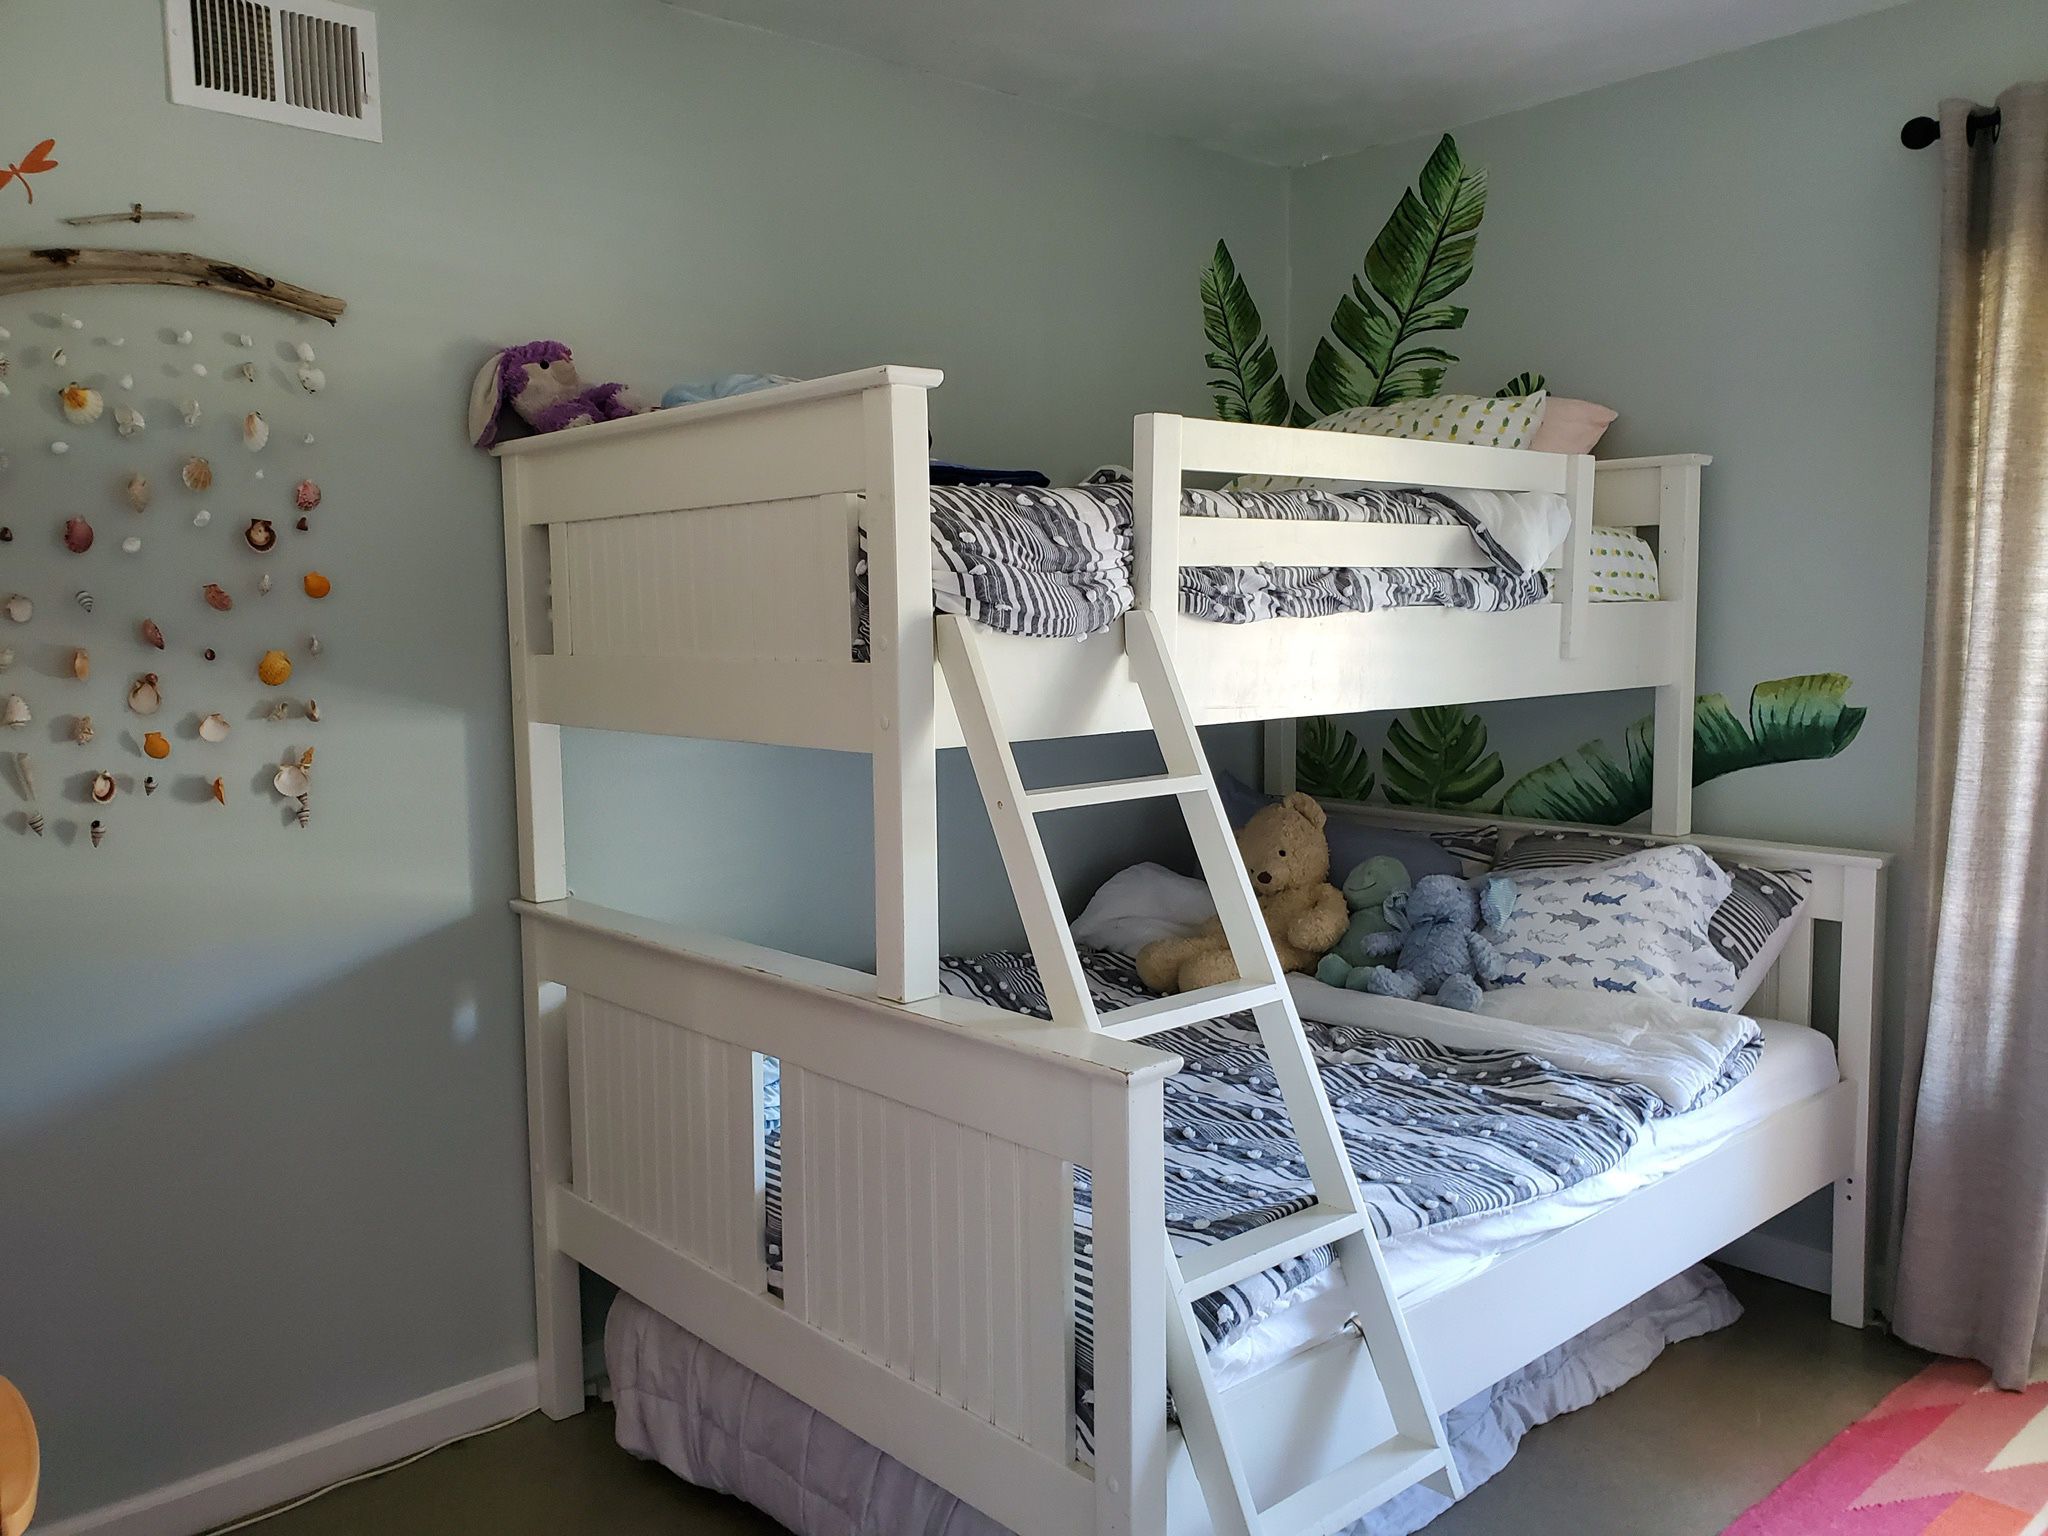 Twin Over Full Bunk Beds